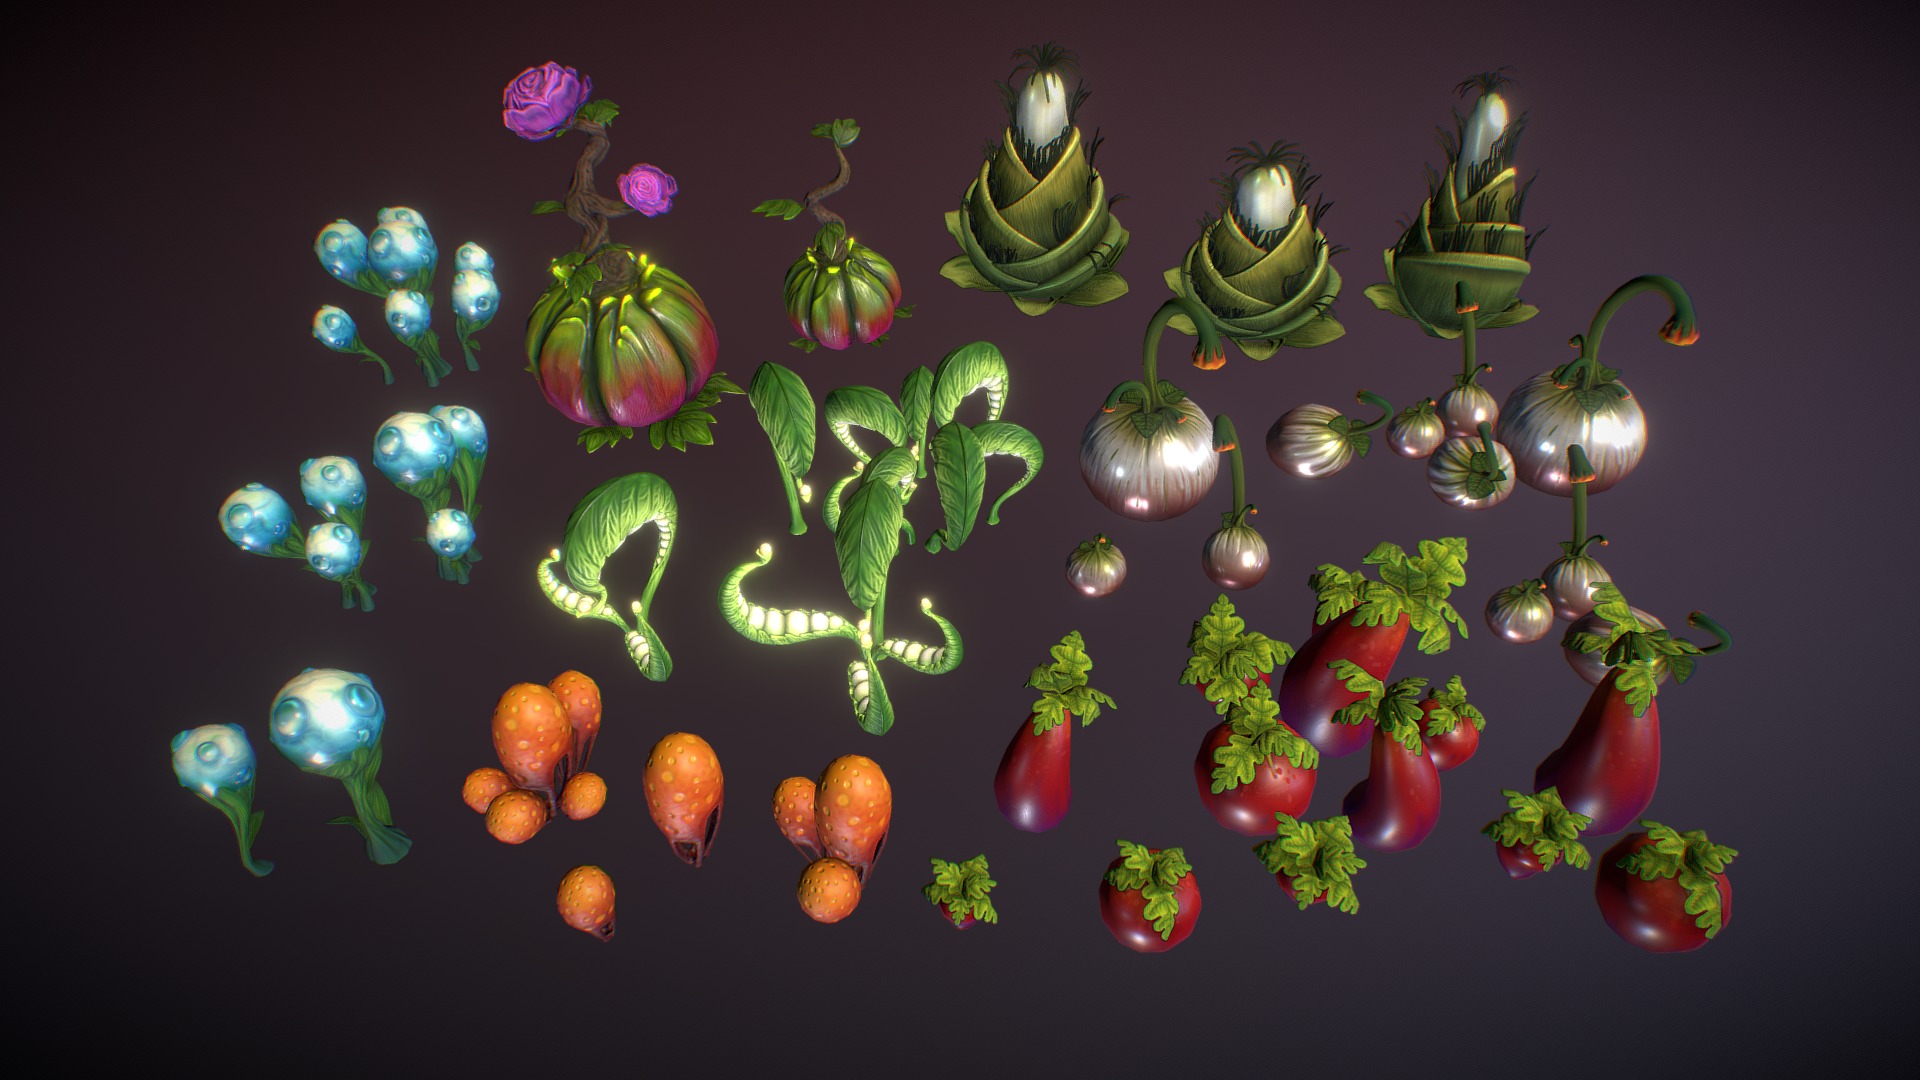 Few kinds of fantasy plants for your project. Each kind of plants have few different meshes 3d model